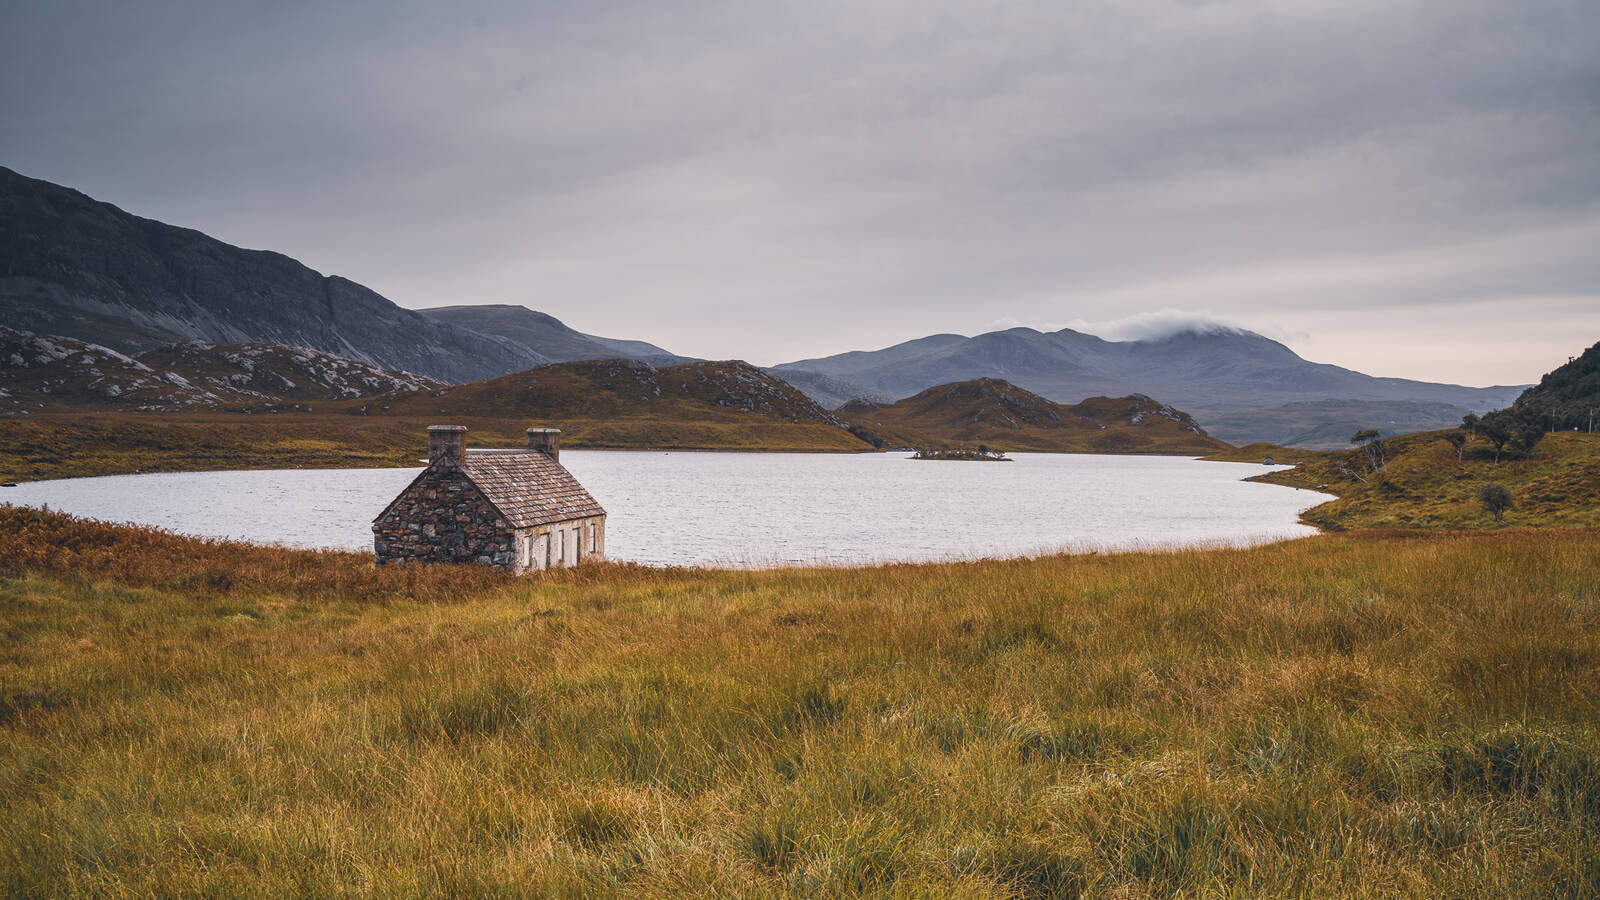 Image of The abandoned cottage at Loch Stack by James Billings.